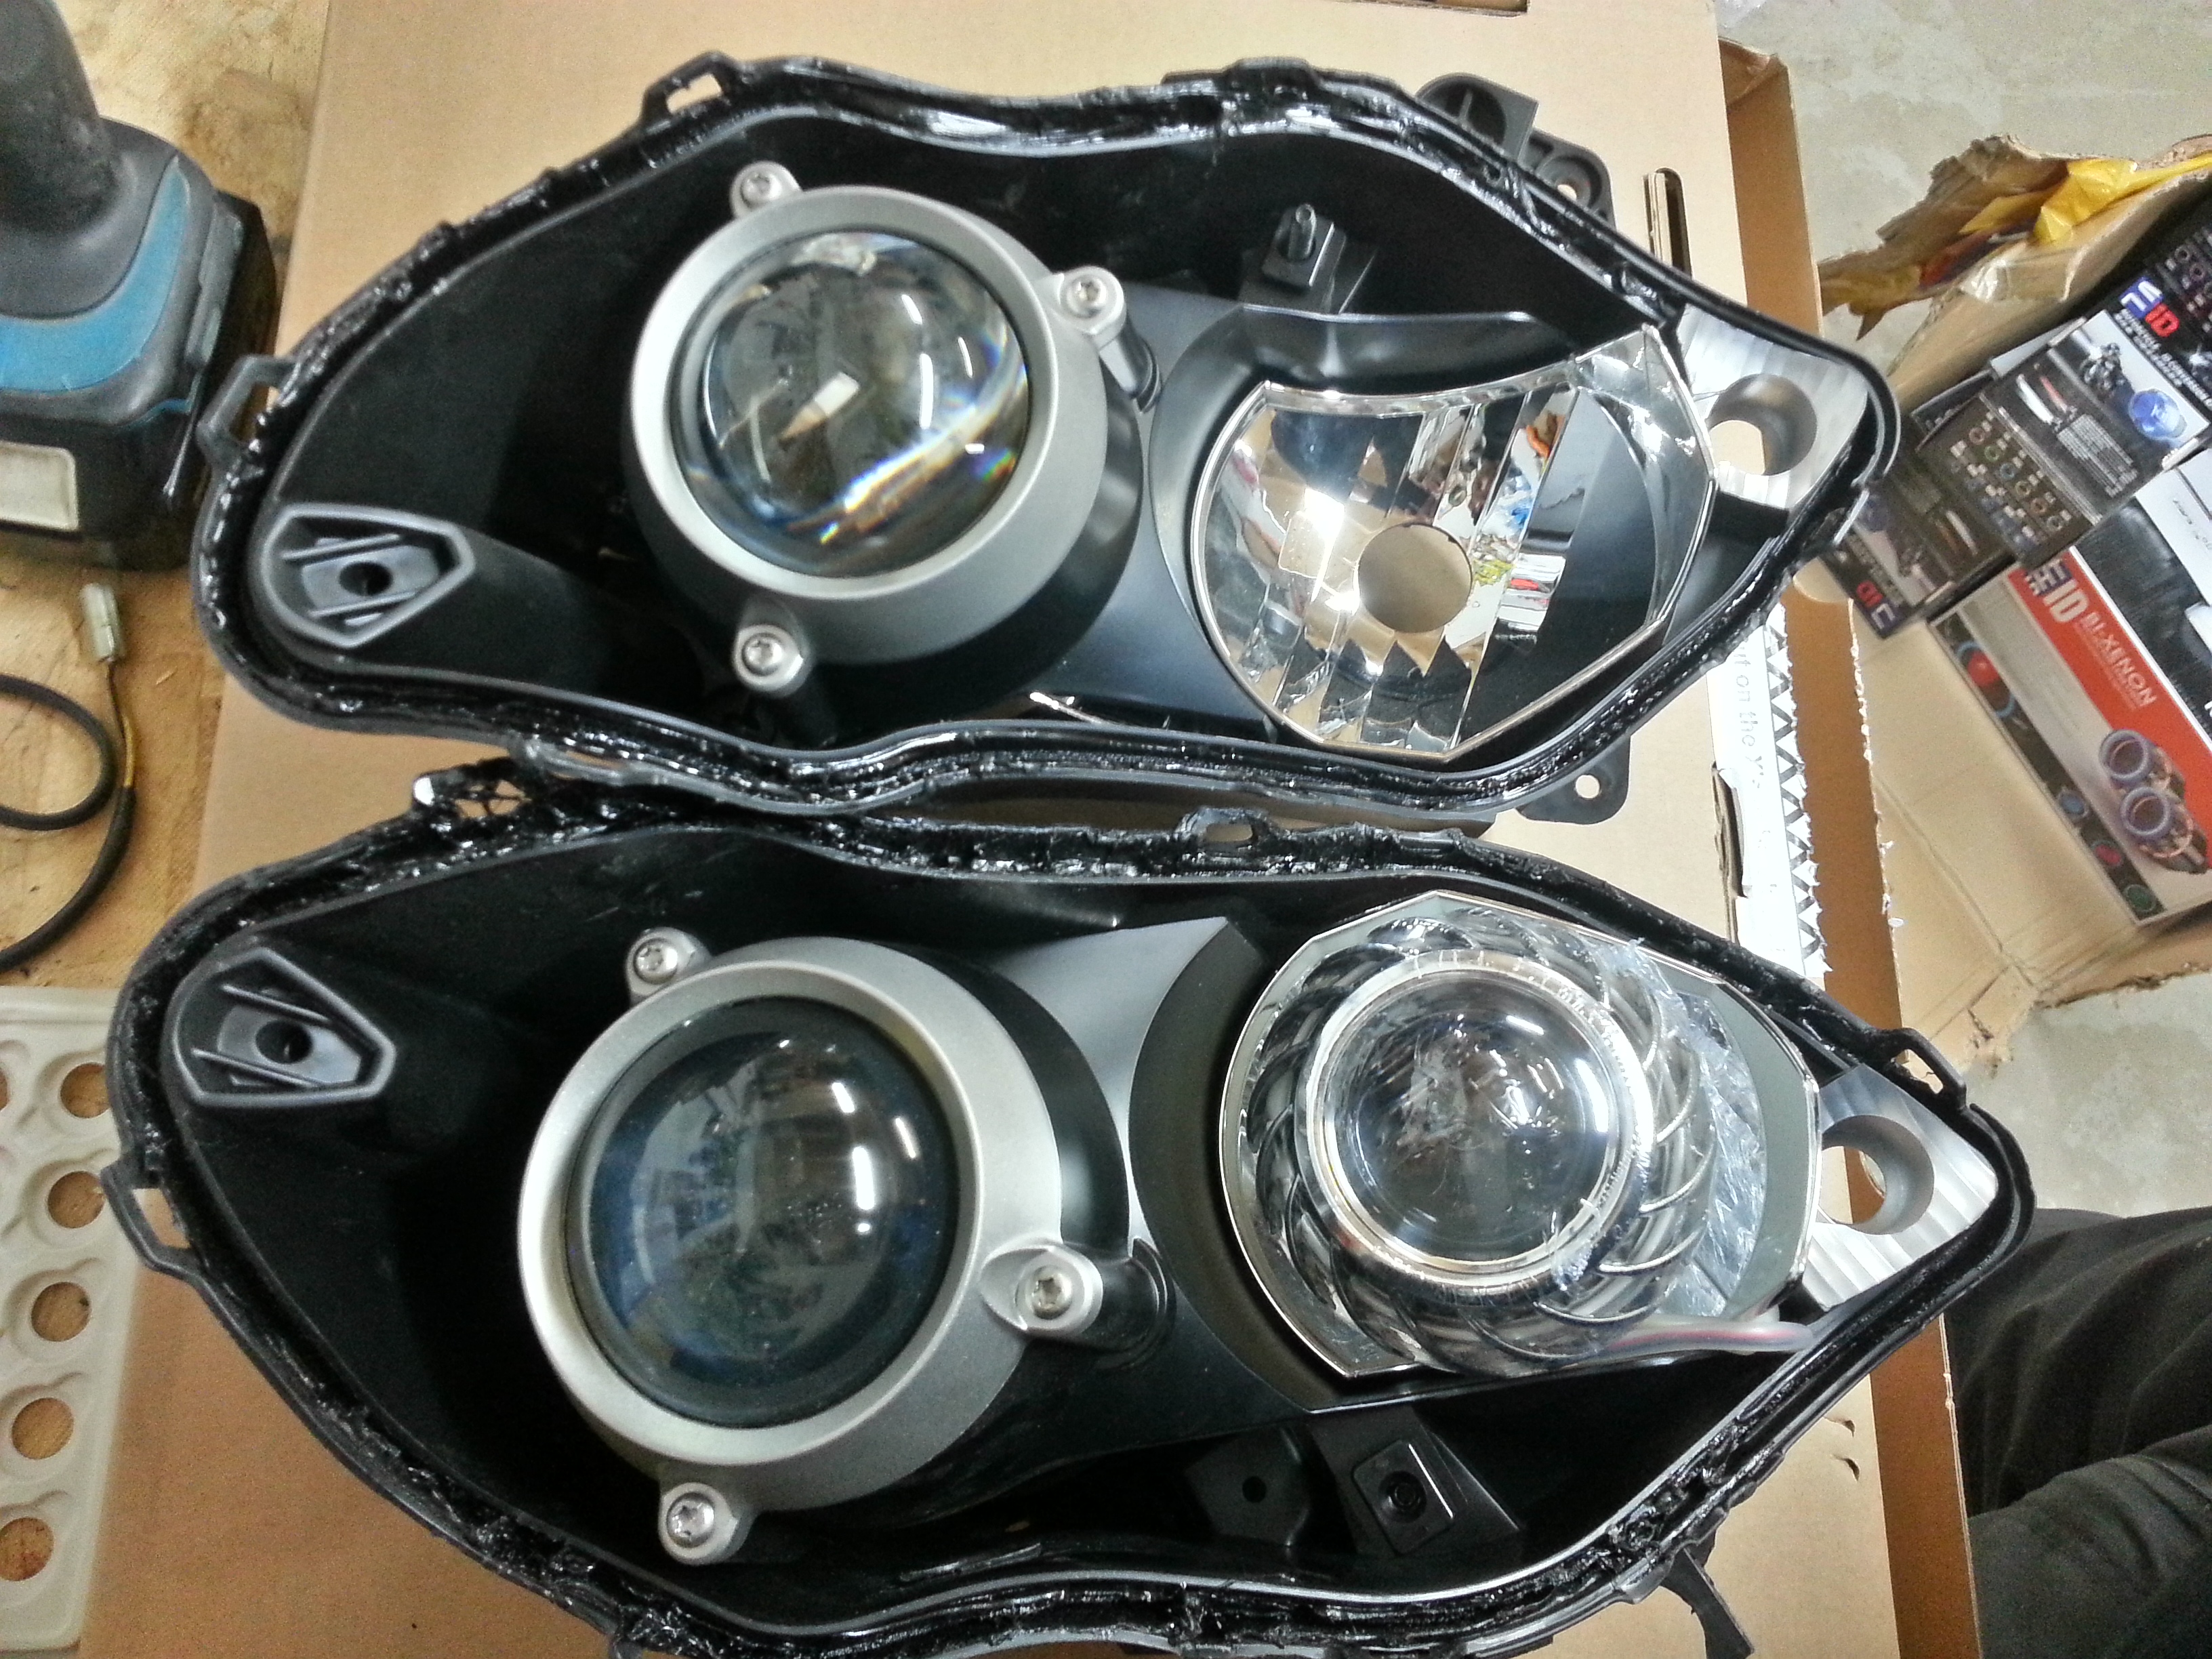 TOP HEADLIGHT IS FACTORY, BUTTOM HEADLIGHT HAS THE HID PROJECTOR INSTALLED ON THE RIGHT SIDE 